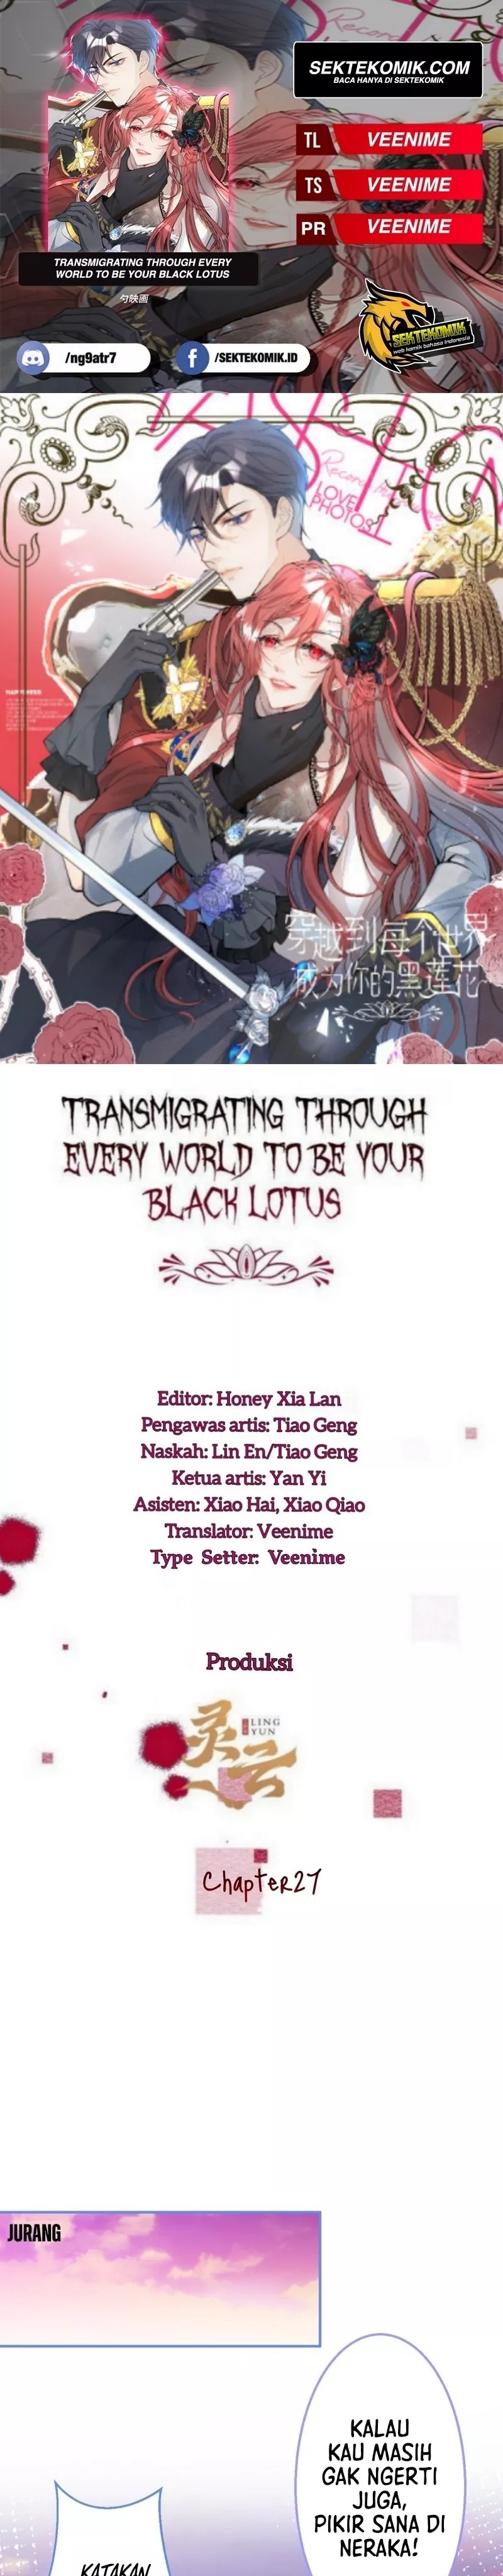 Transmigrating Through Every World to Be Your Black Lotus Chapter 27